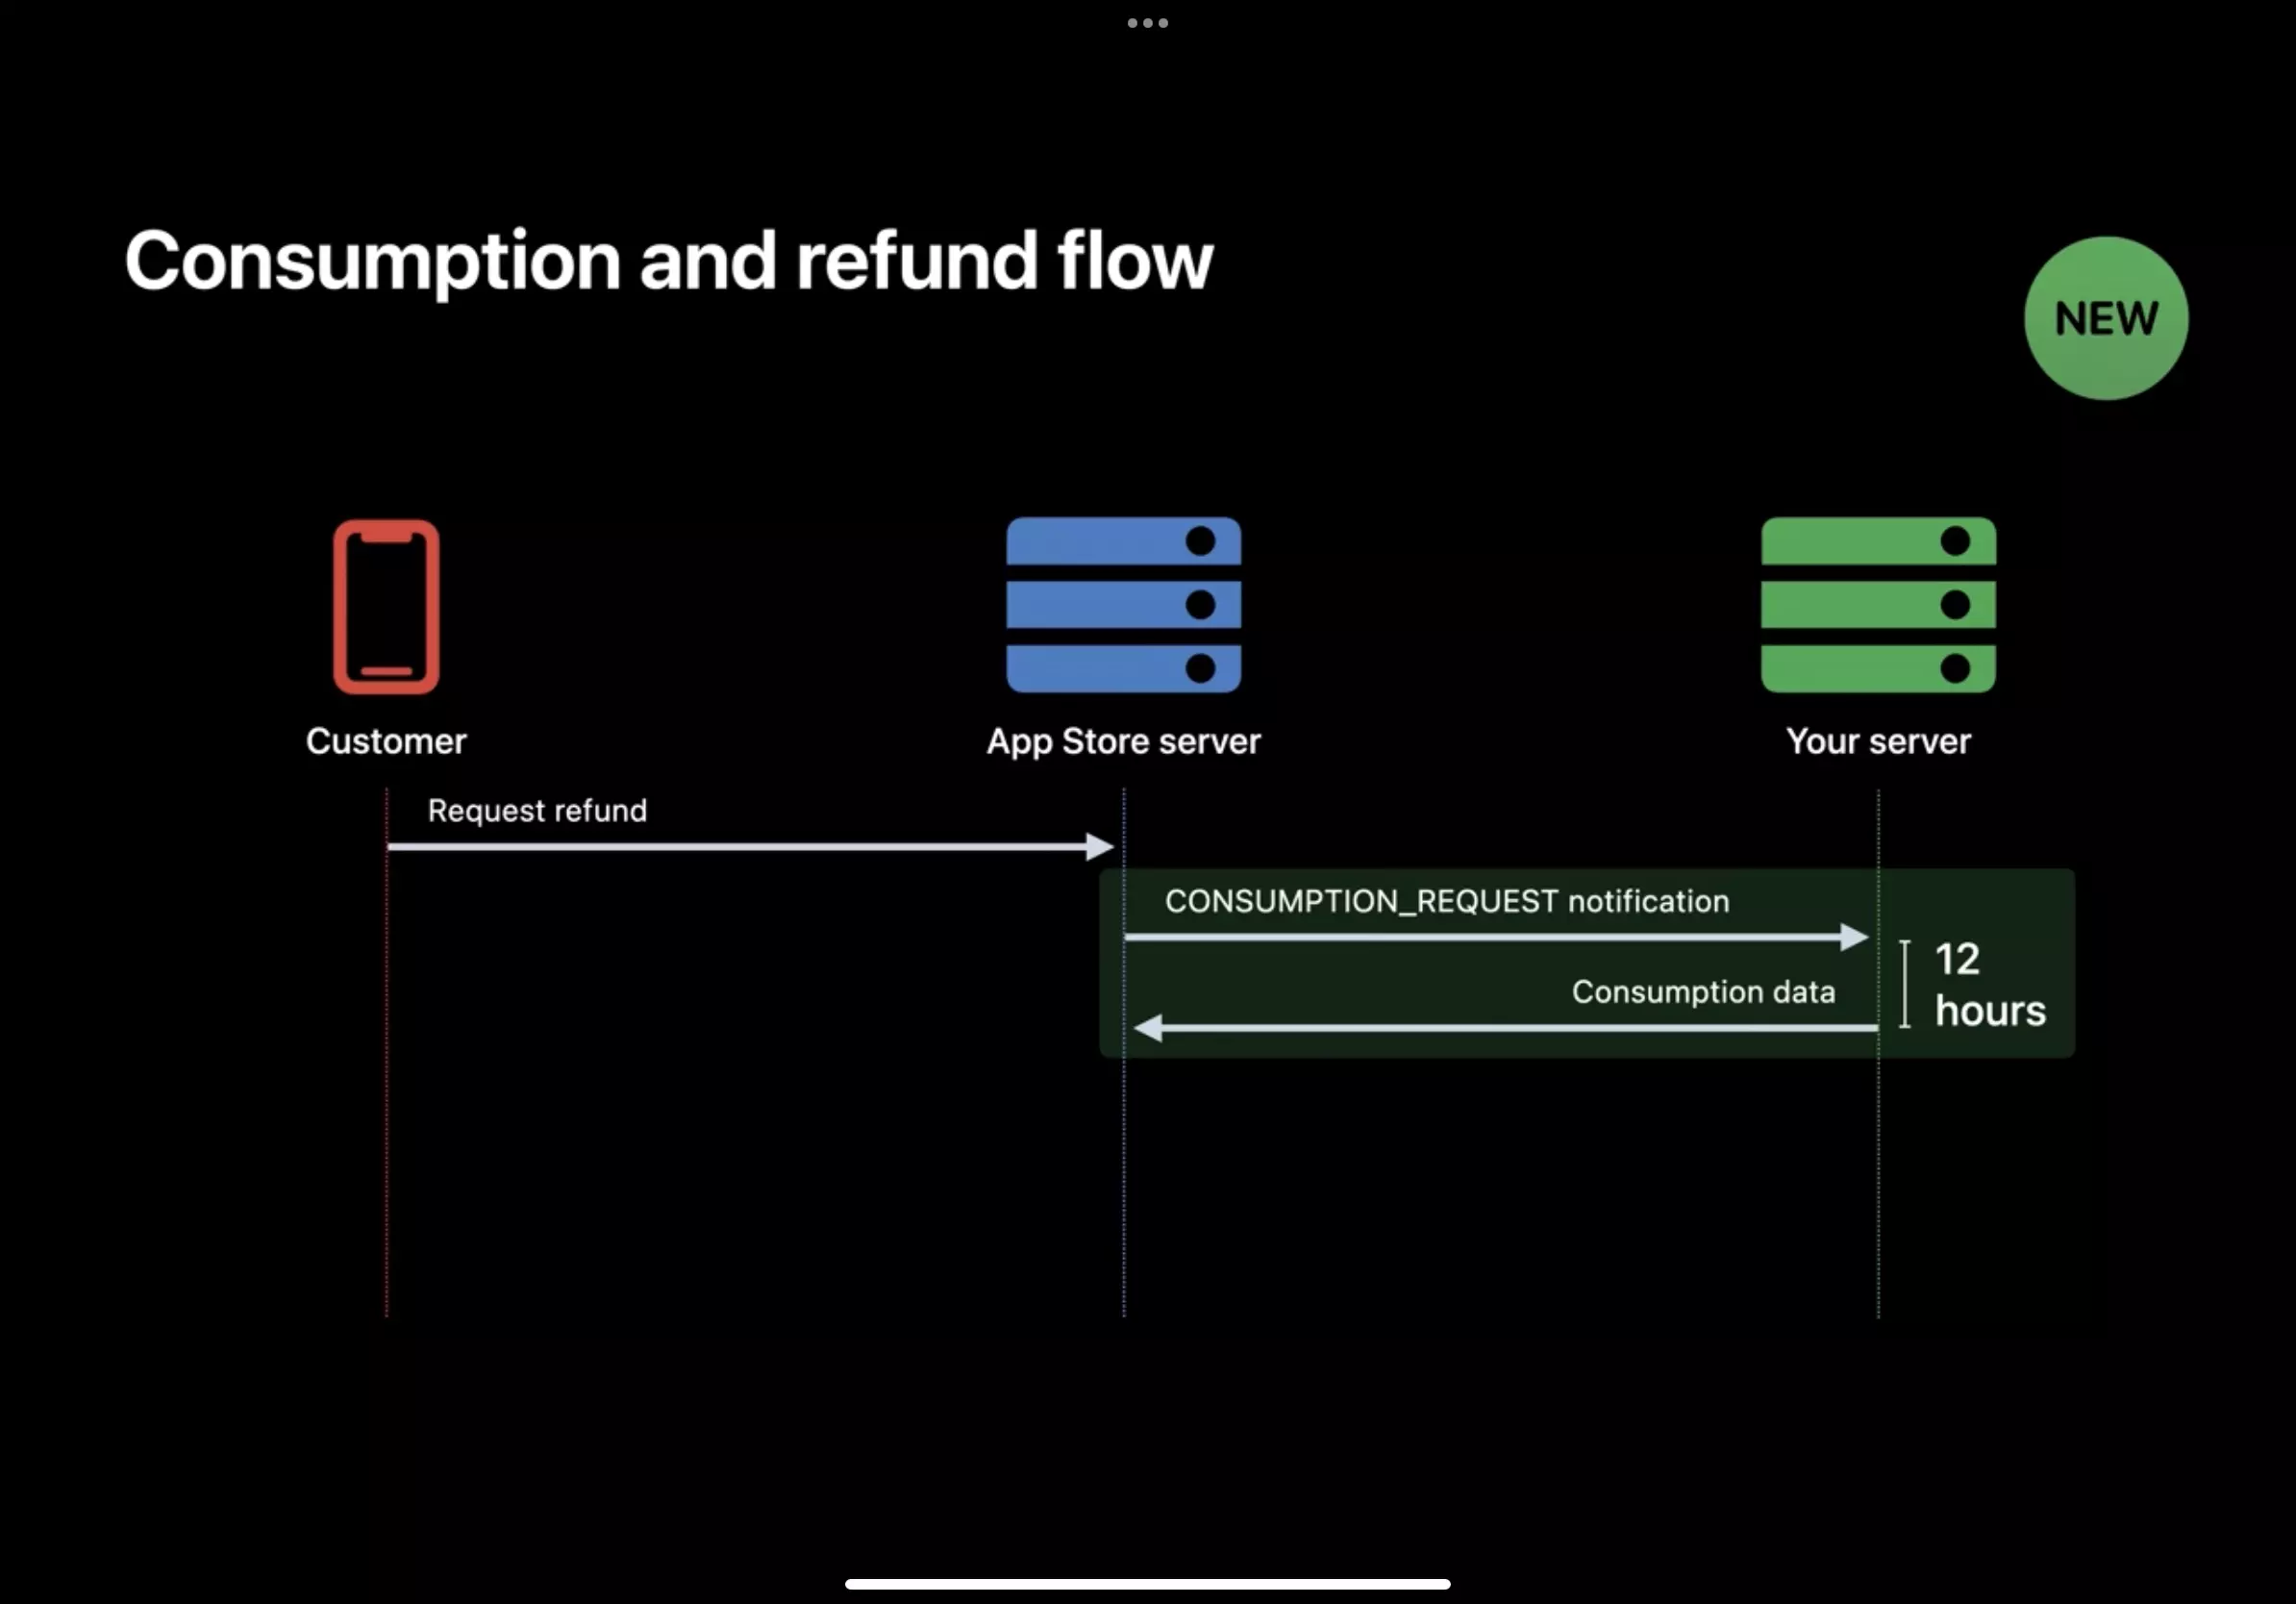 An illustration showing that after a customer requests a refund, Apple will make a consumption request to your server for your business to be able to weight in on the decision.